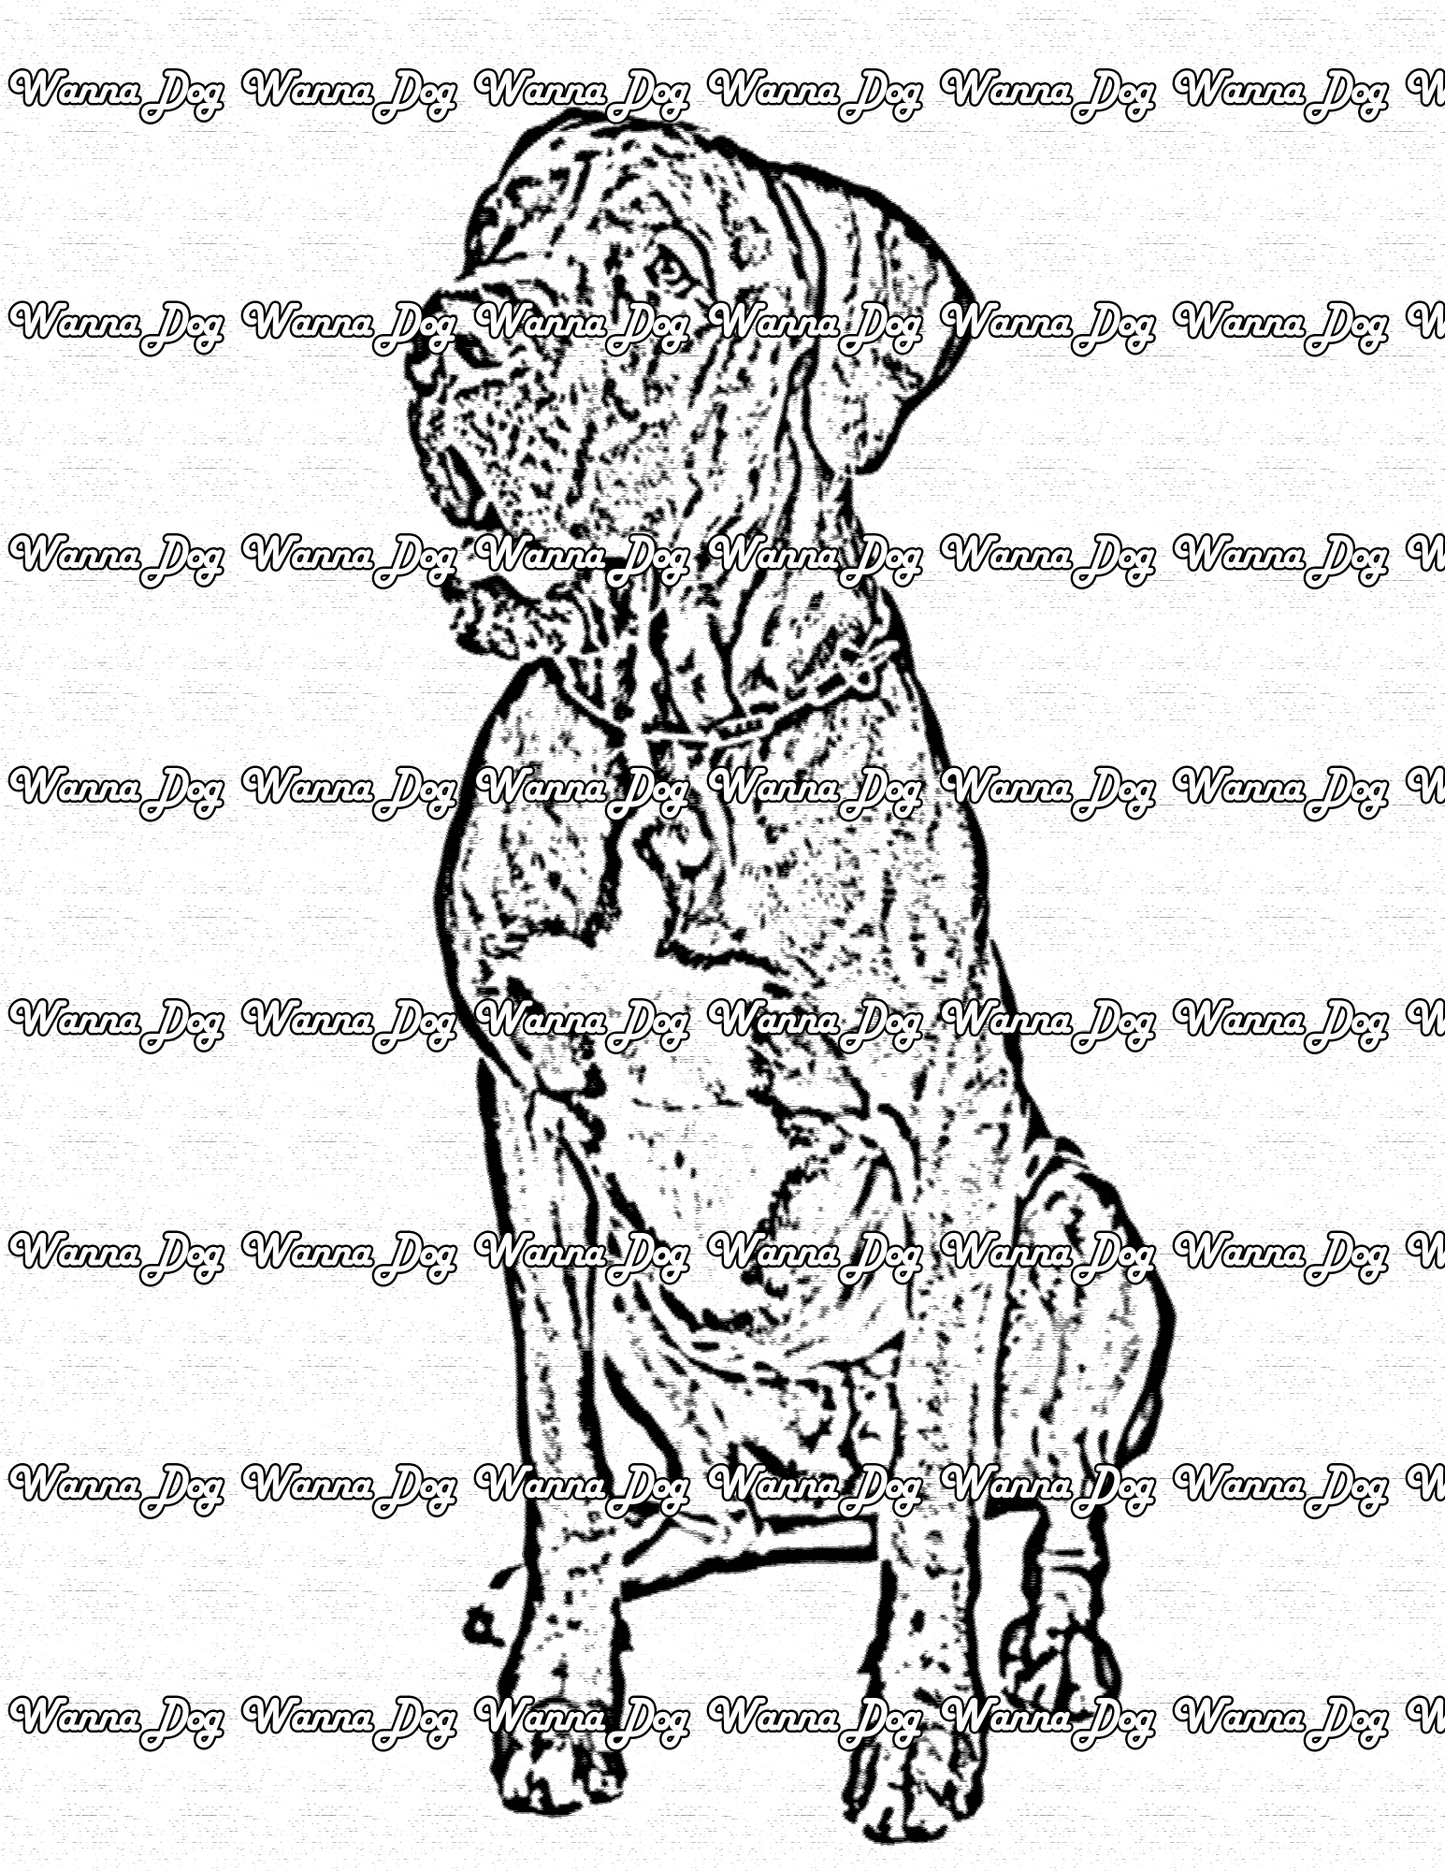 Great Dane Coloring Page of a Great Dane sitting and smiling